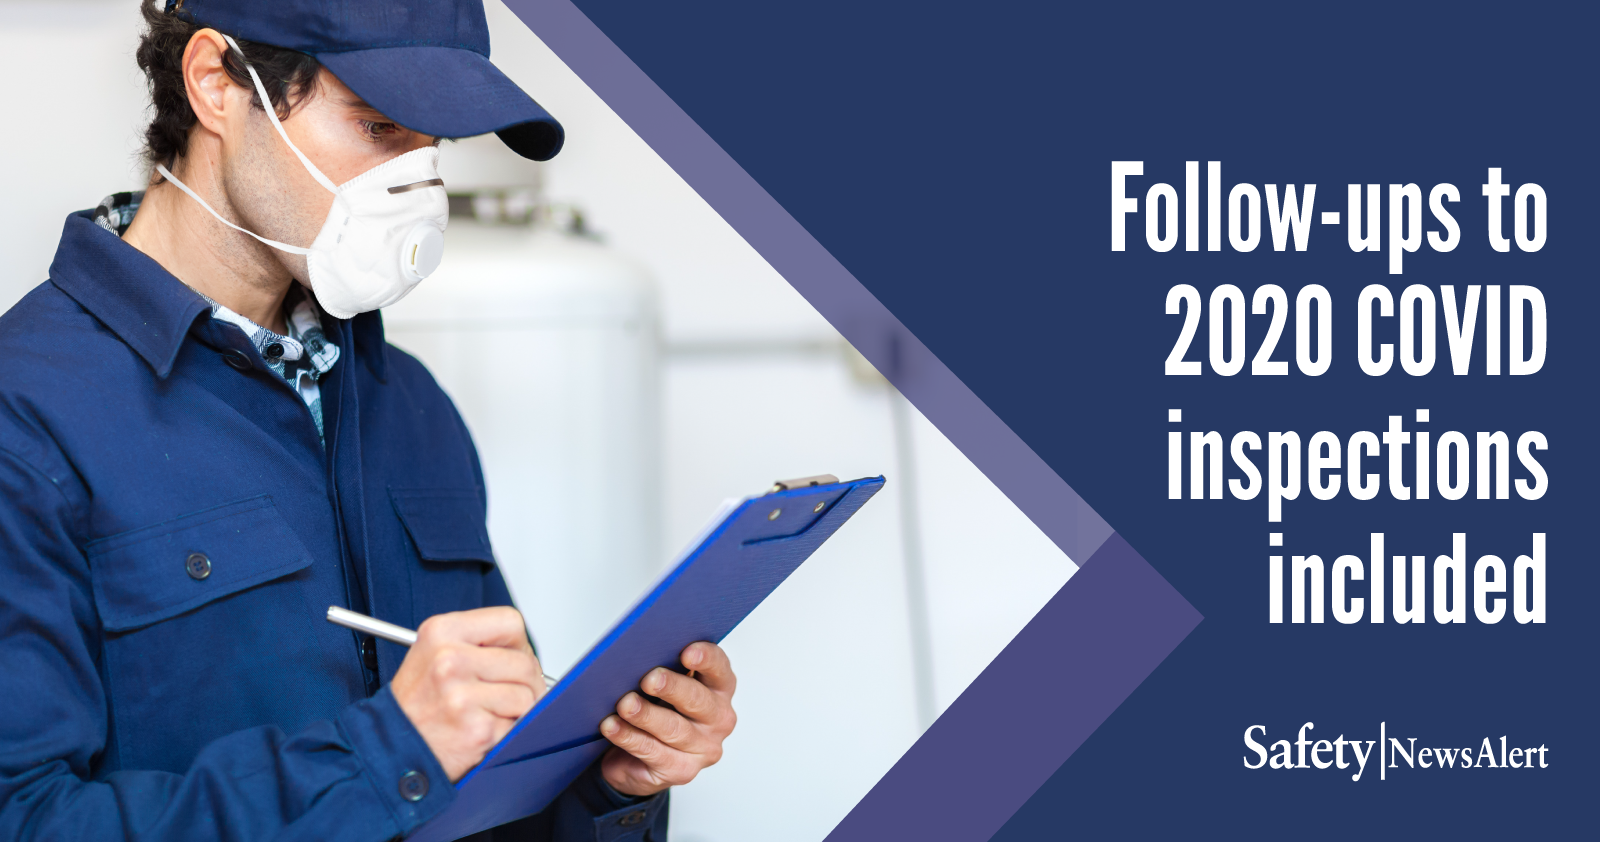 Follow-ups To 2020 COVID Inspections Included